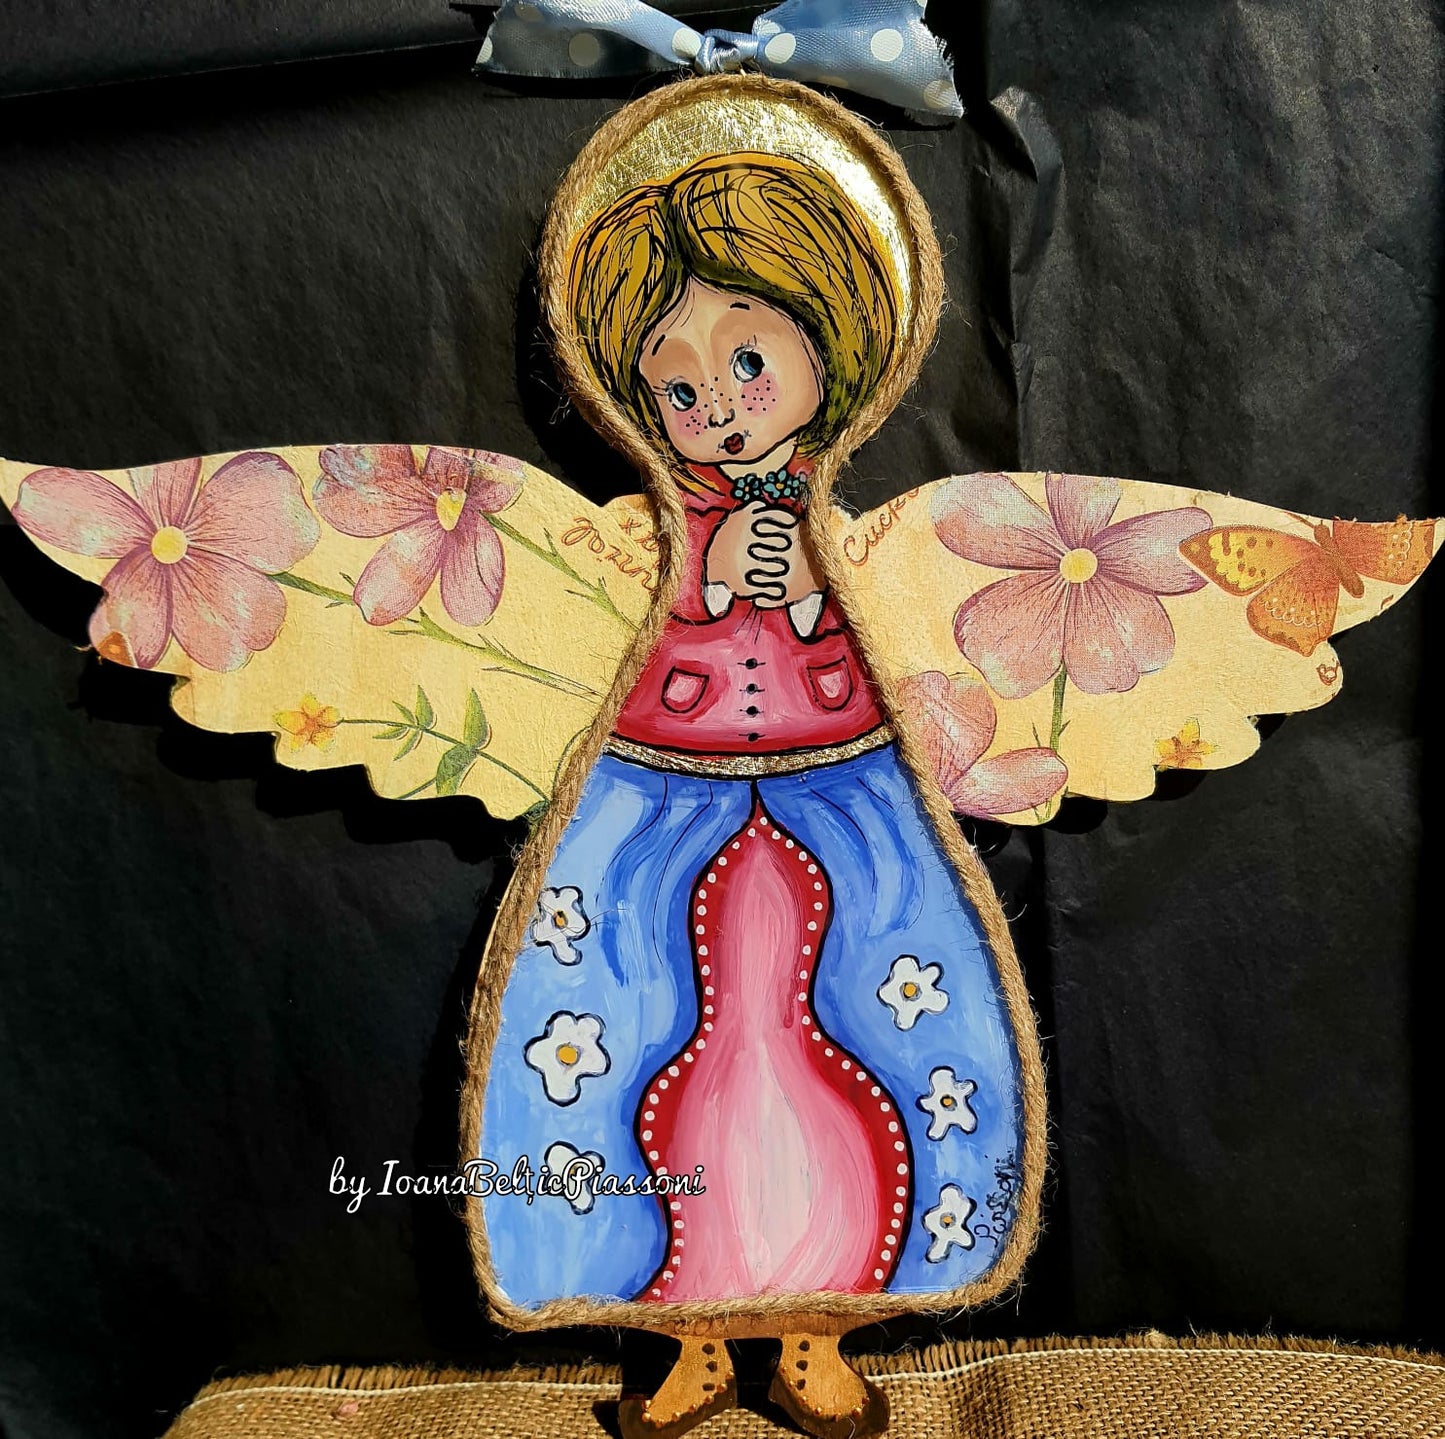 The Angel of Innocence: A Magical Glass Painting (03)